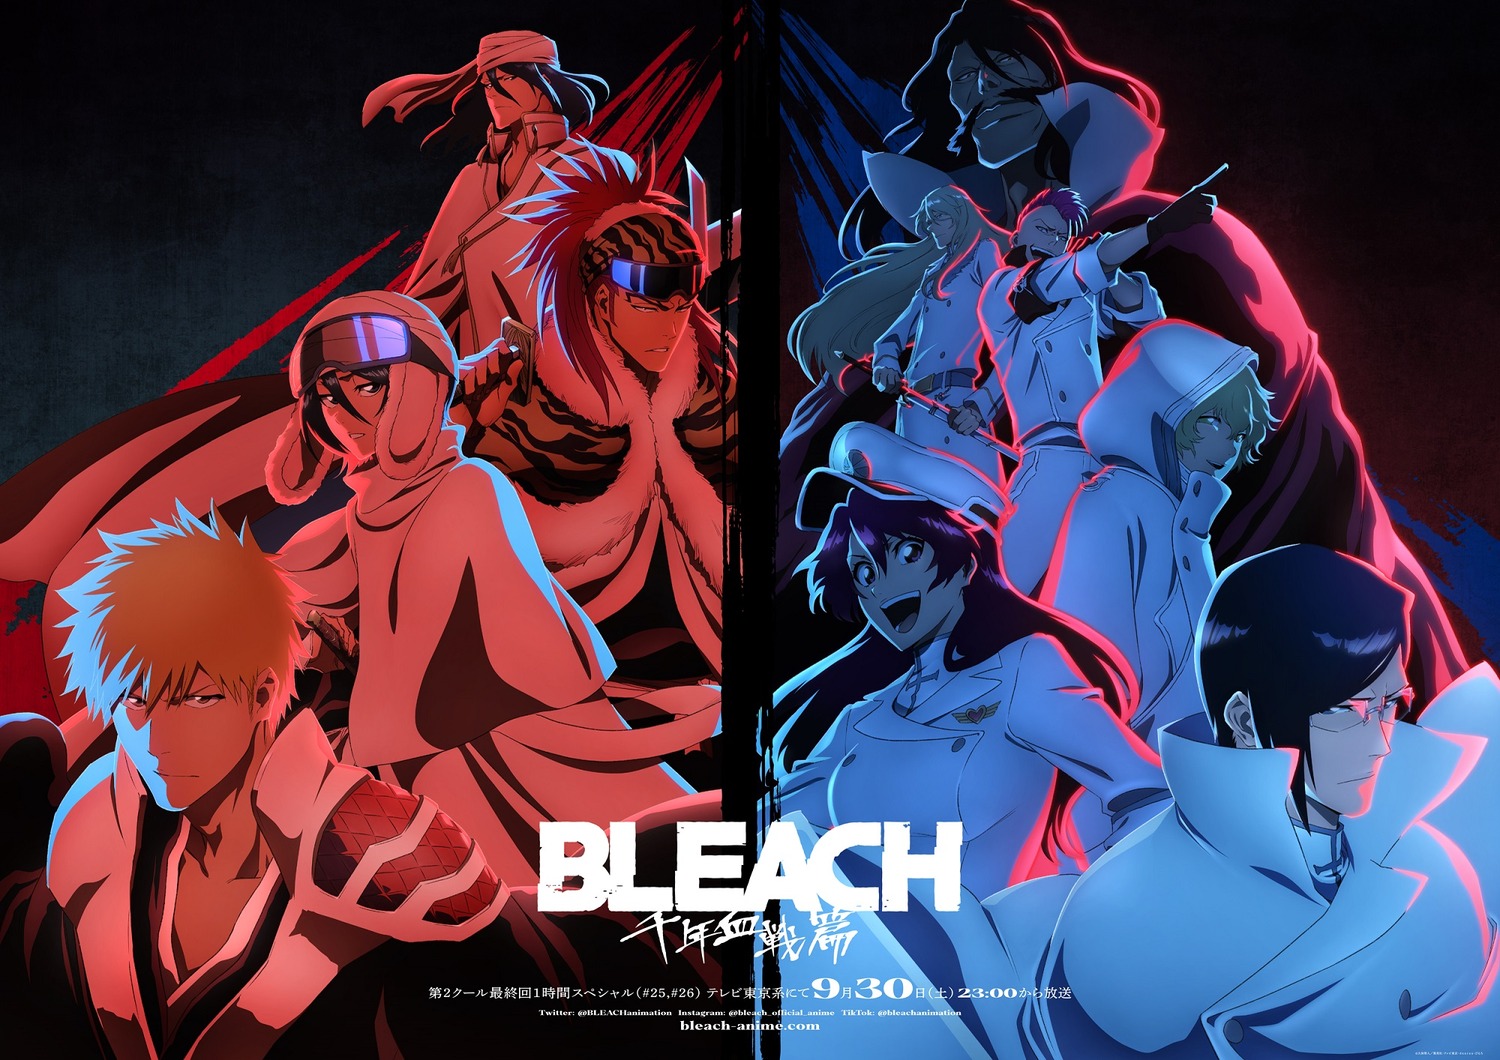 Extra Large TV Poster Image for Bleach: Thousand Year Blood War (#7 of 7)